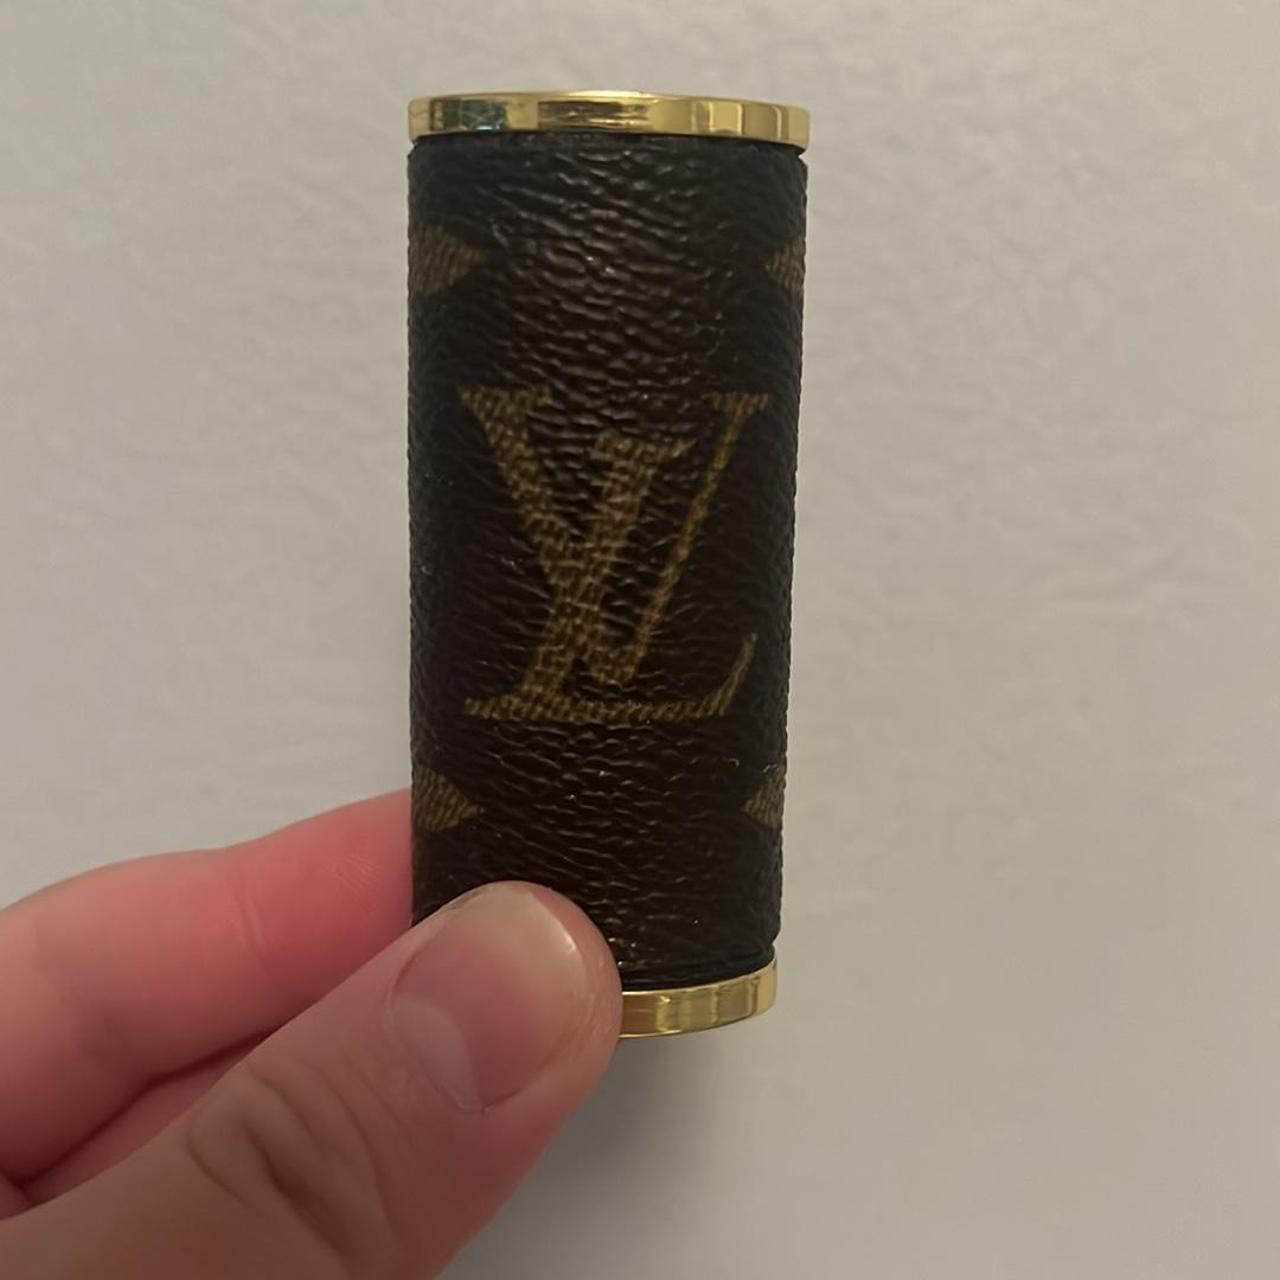 Authentic Louis Vuitton wrapped lighter cases. #upcycle Validco.shop